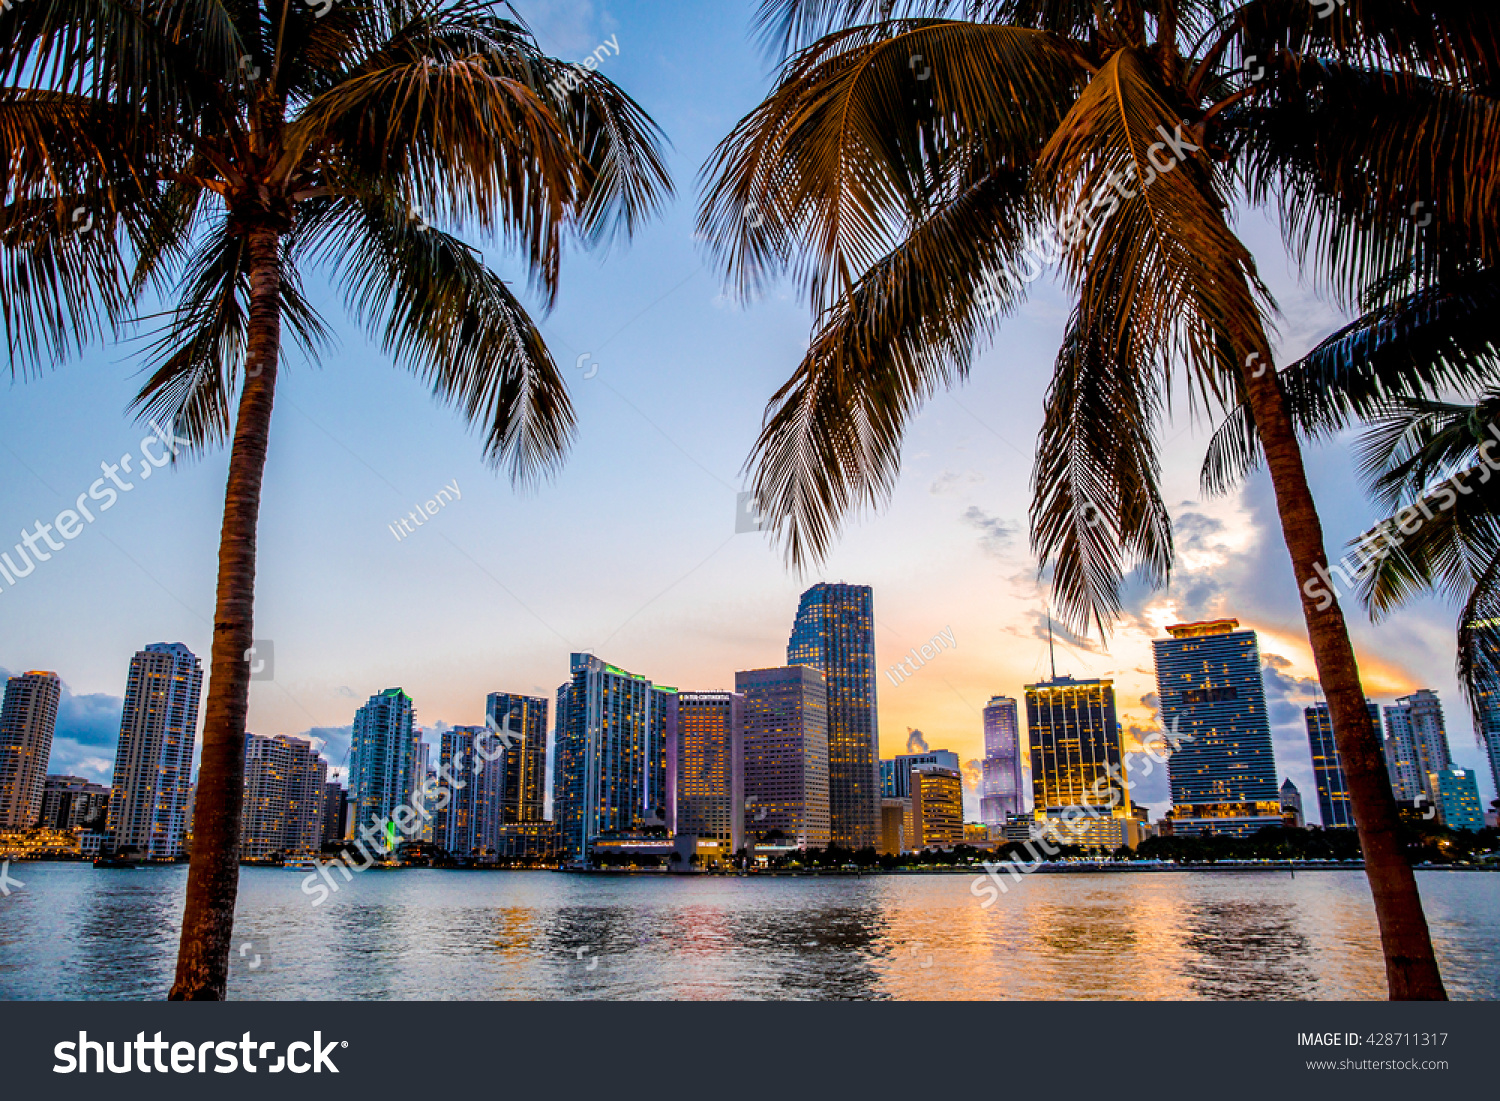 Miami, Florida skyline and bay at sunset seen through palm trees  #428711317